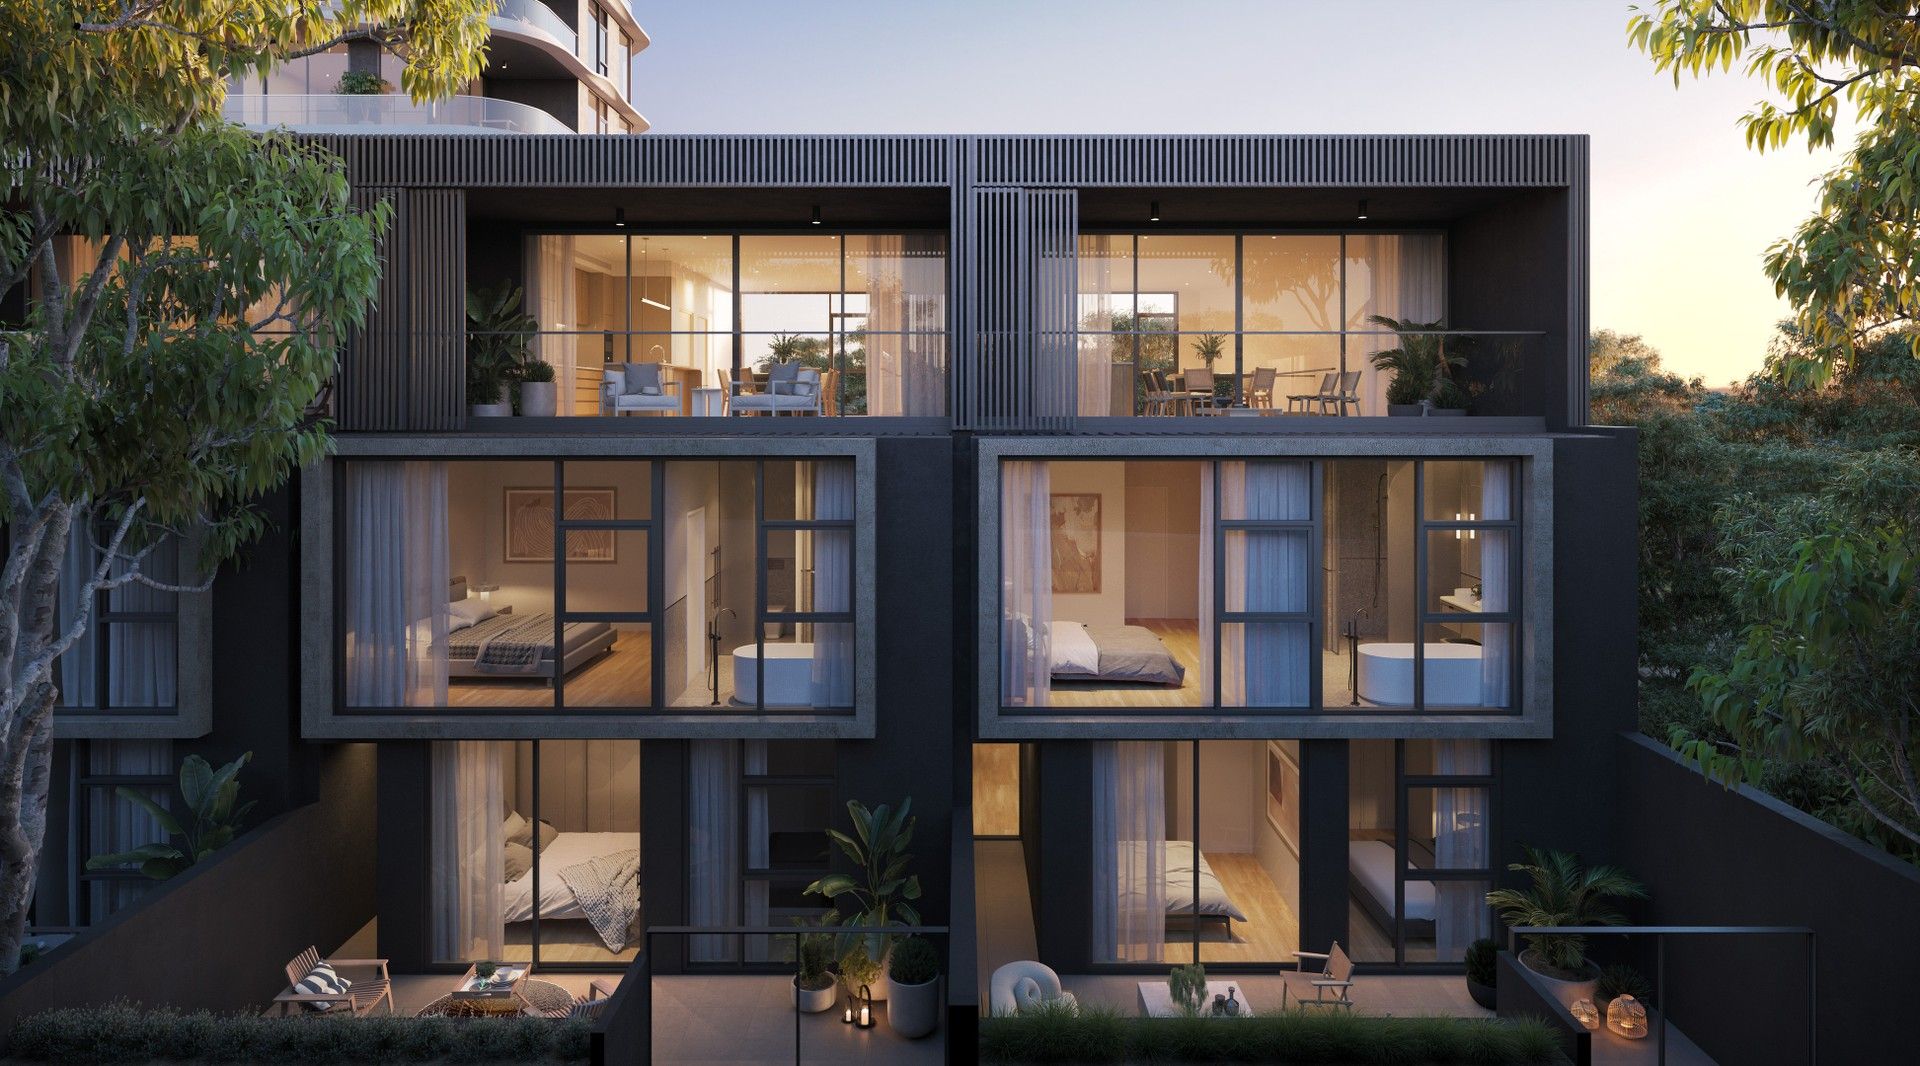 4 bedrooms New Apartments / Off the Plan in 3007/21 McCabe Street NORTH FREMANTLE WA, 6159